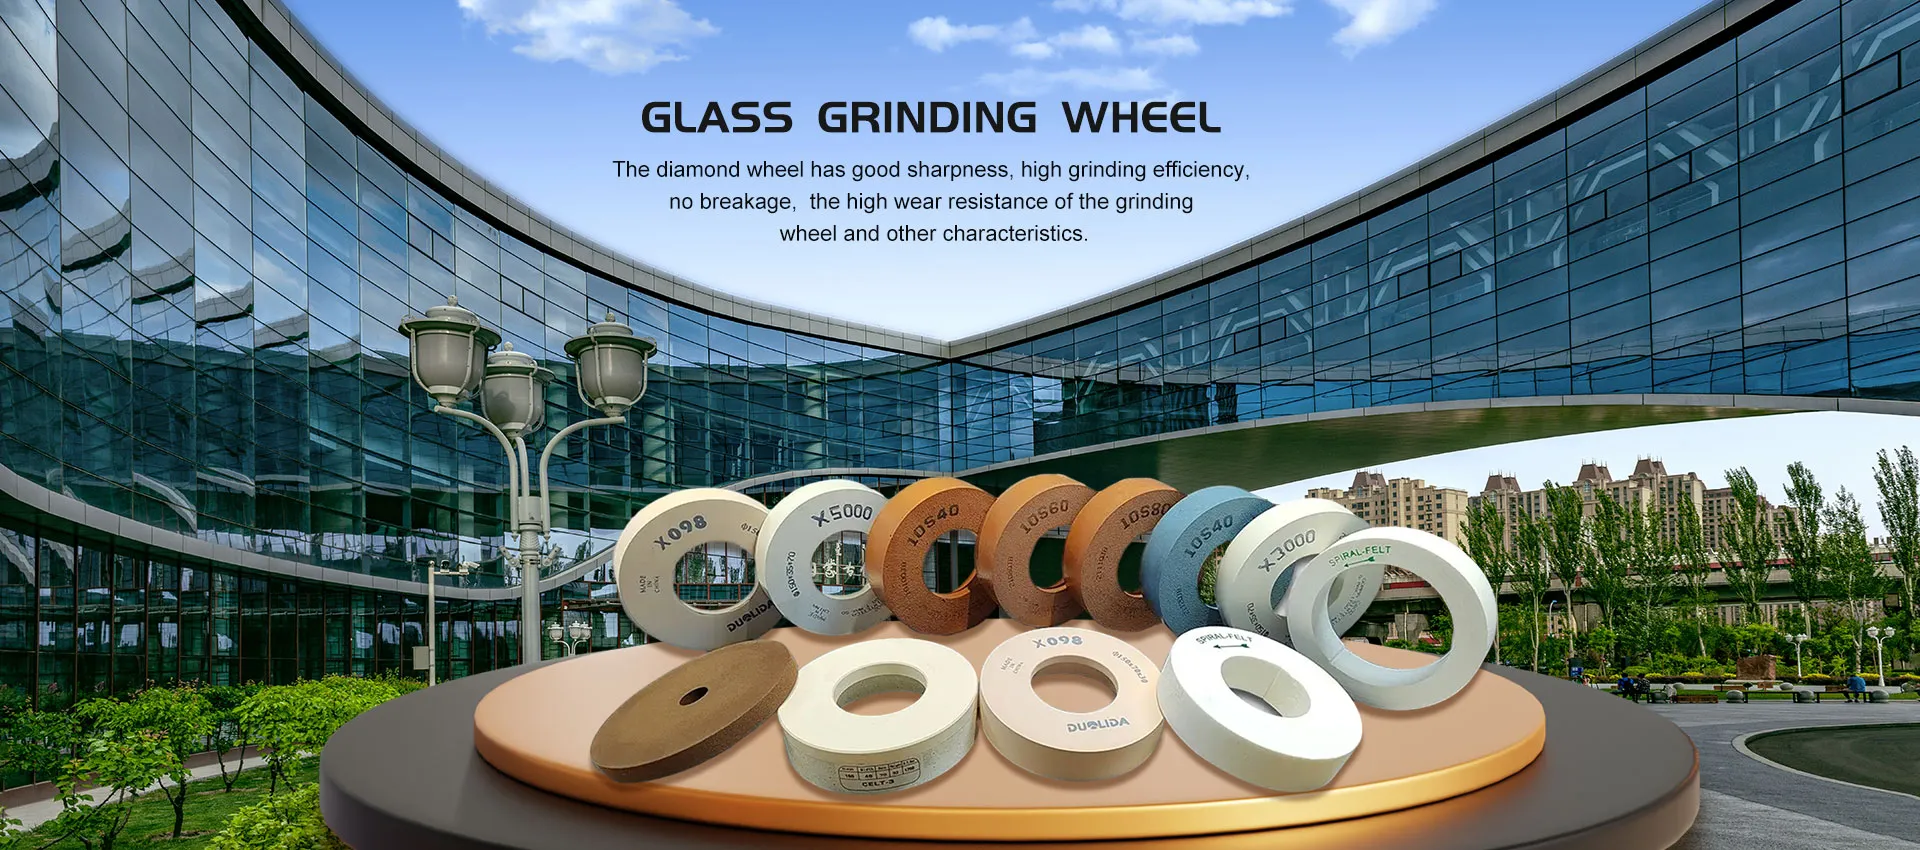 China Glass Grinding Wheel Supplier